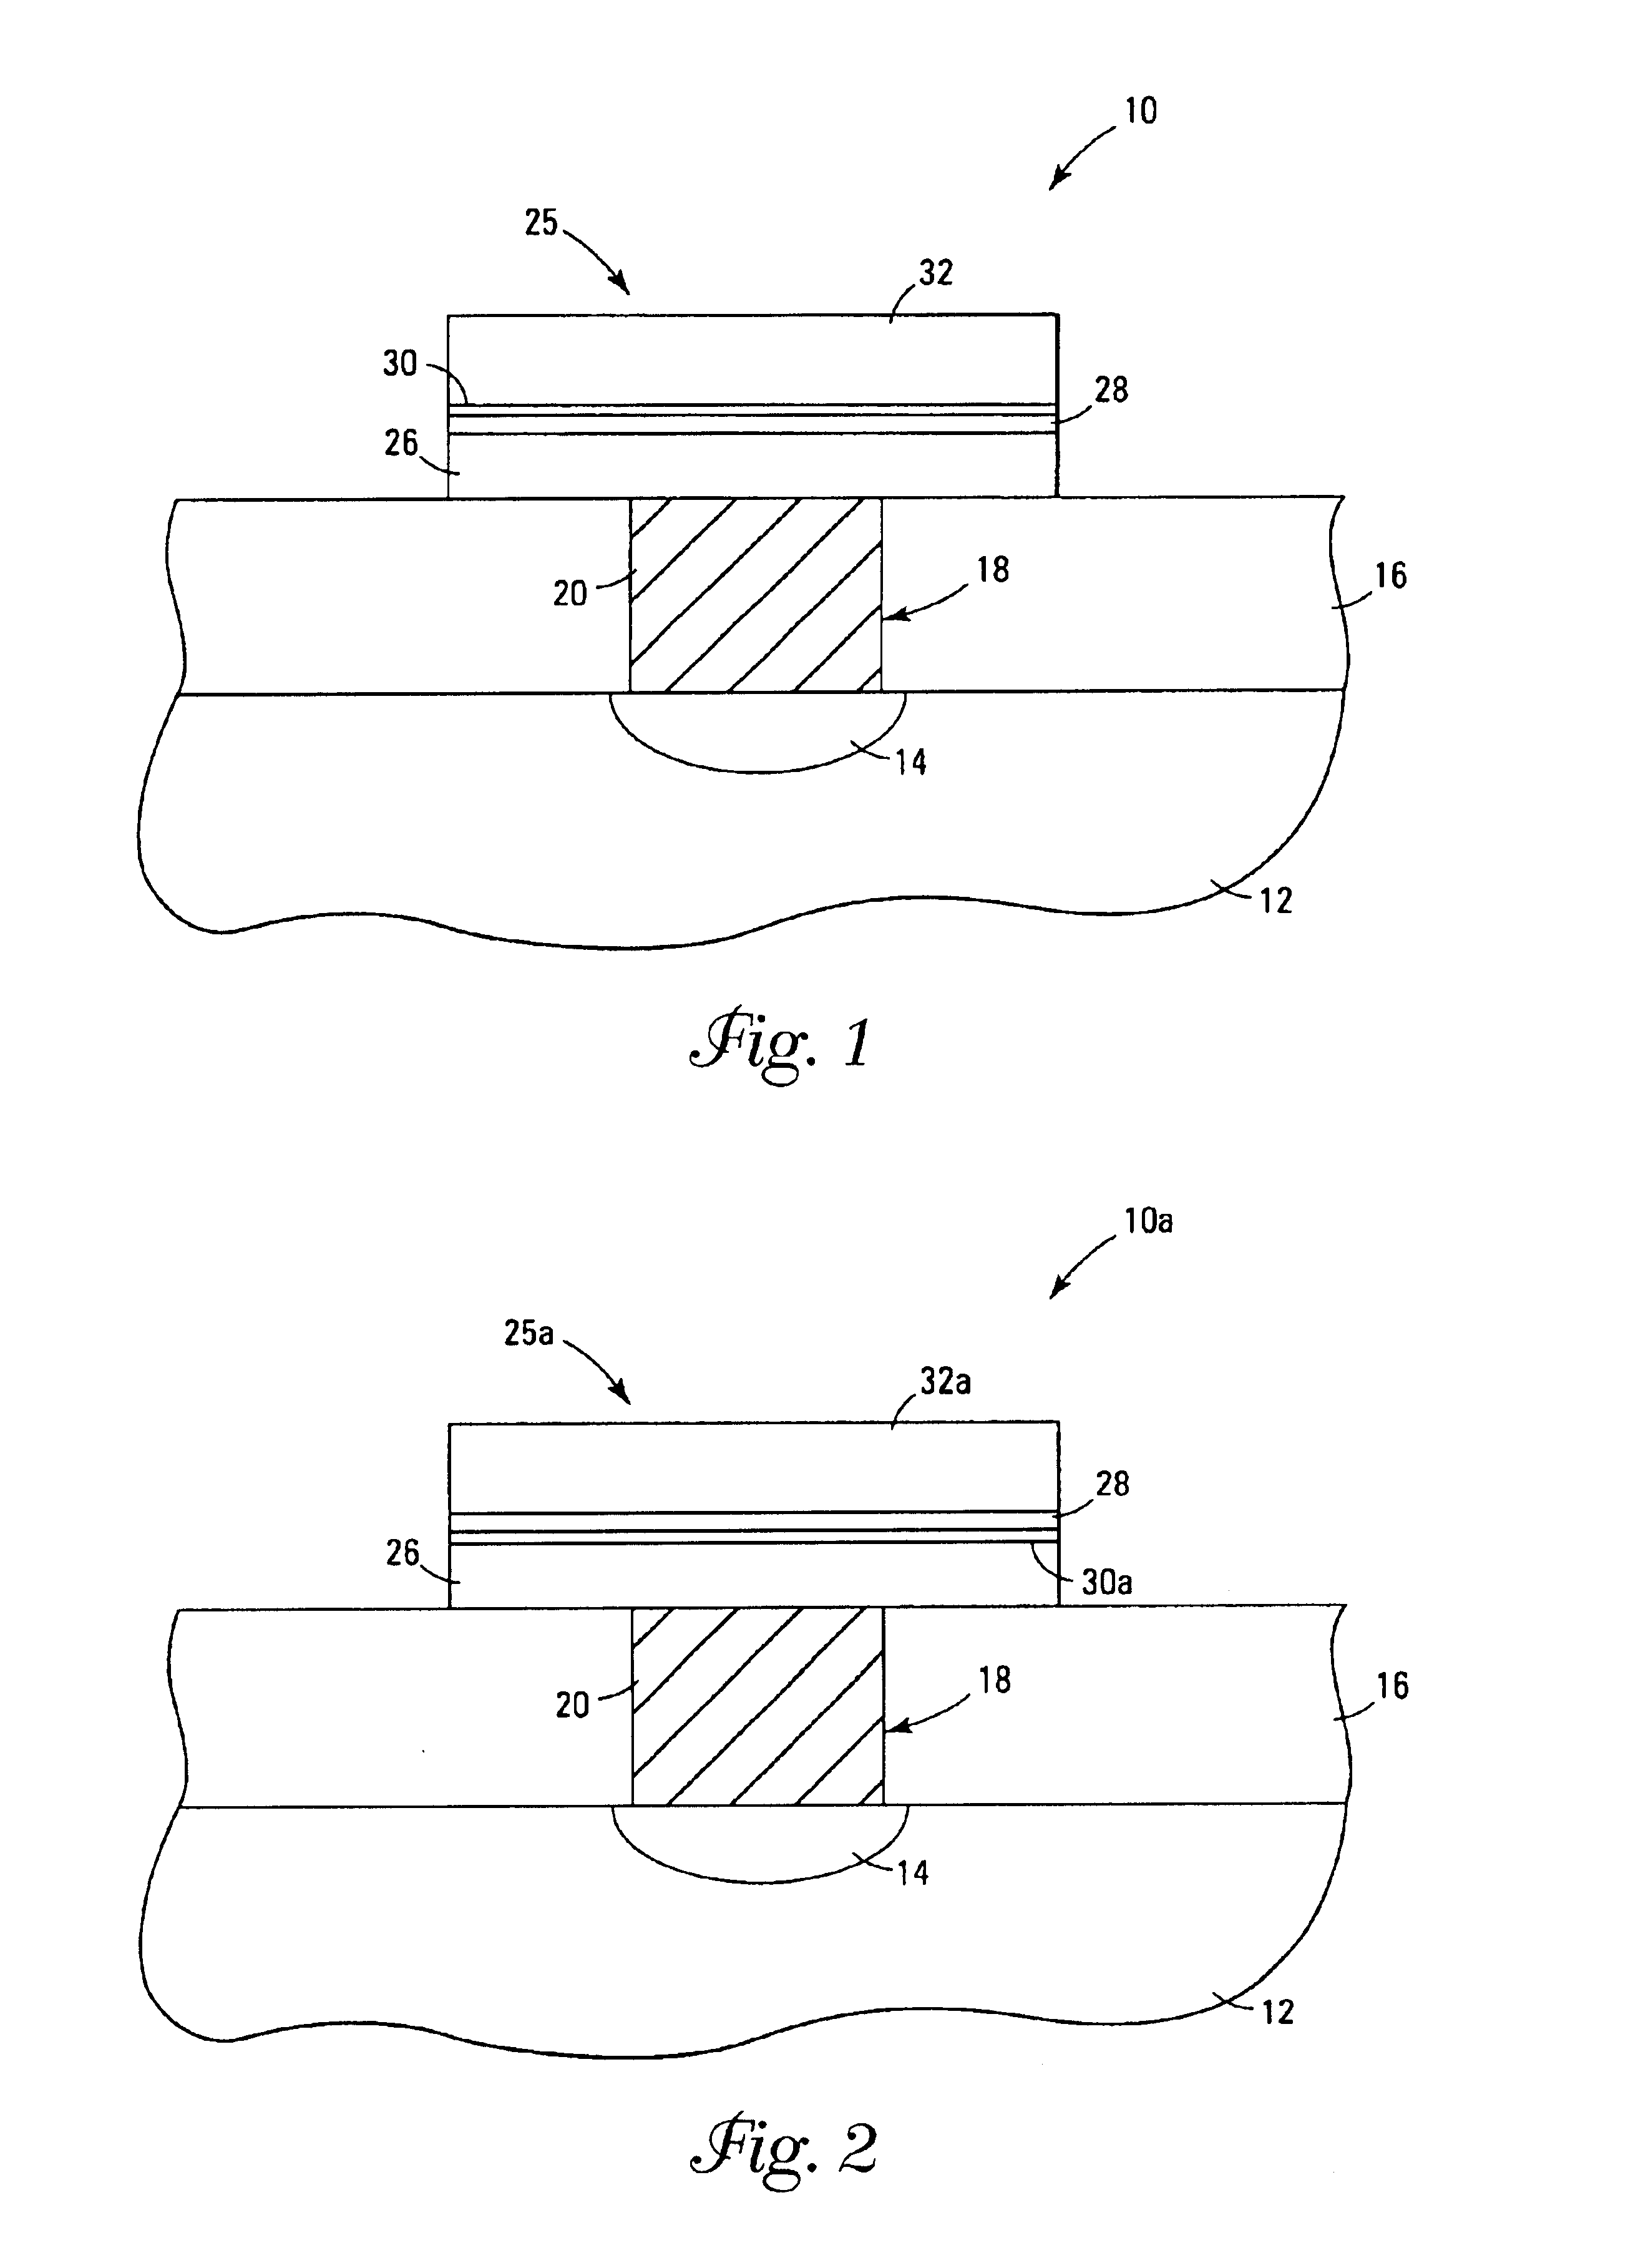 Systems and methods for forming tantalum oxide layers and tantalum precursor compounds